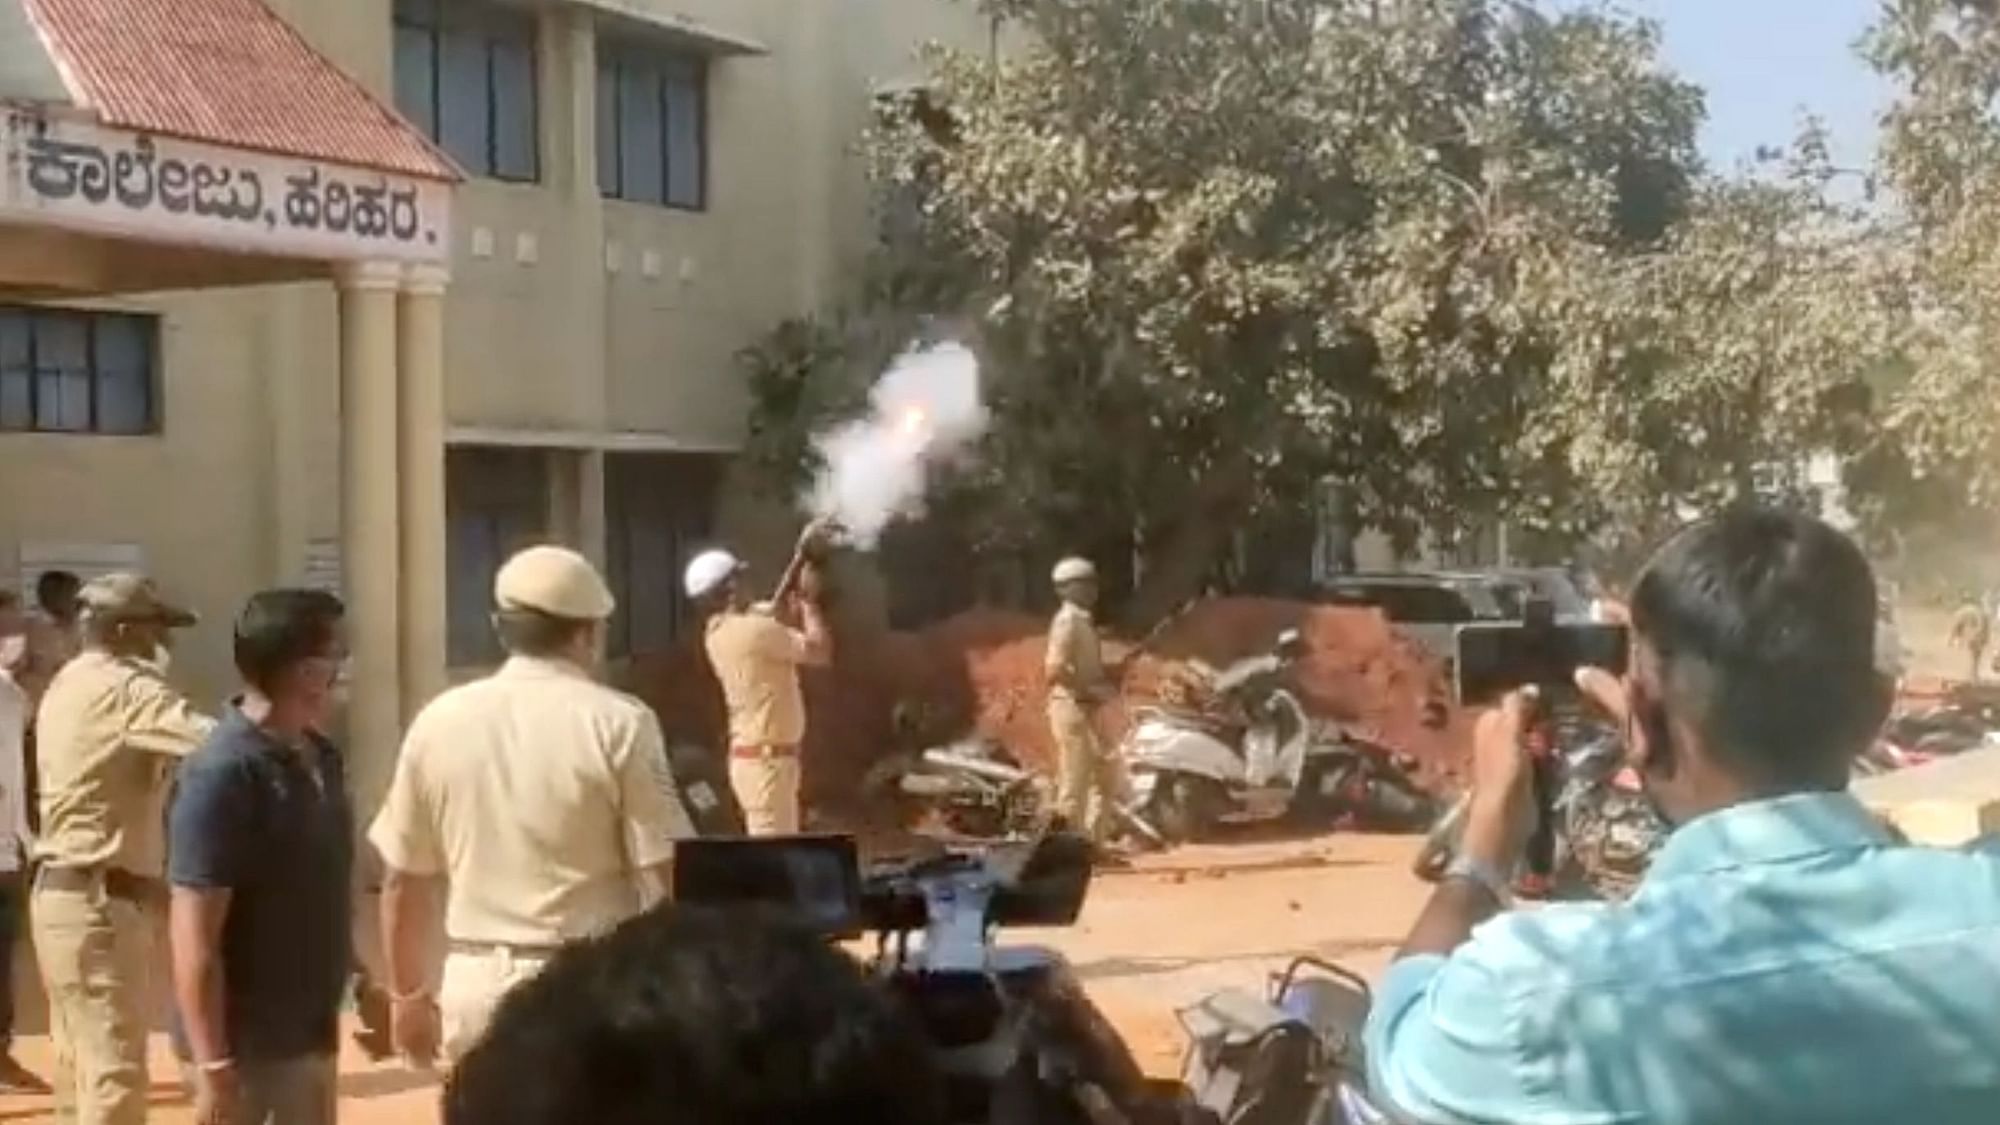 <div class="paragraphs"><p>In Davangere, students and protesters were lathi-charged on Tuesday and sprayed with tear gas as the law and order situation in the area deteriorated. Section 144 was also consequently imposed in the region.</p></div>